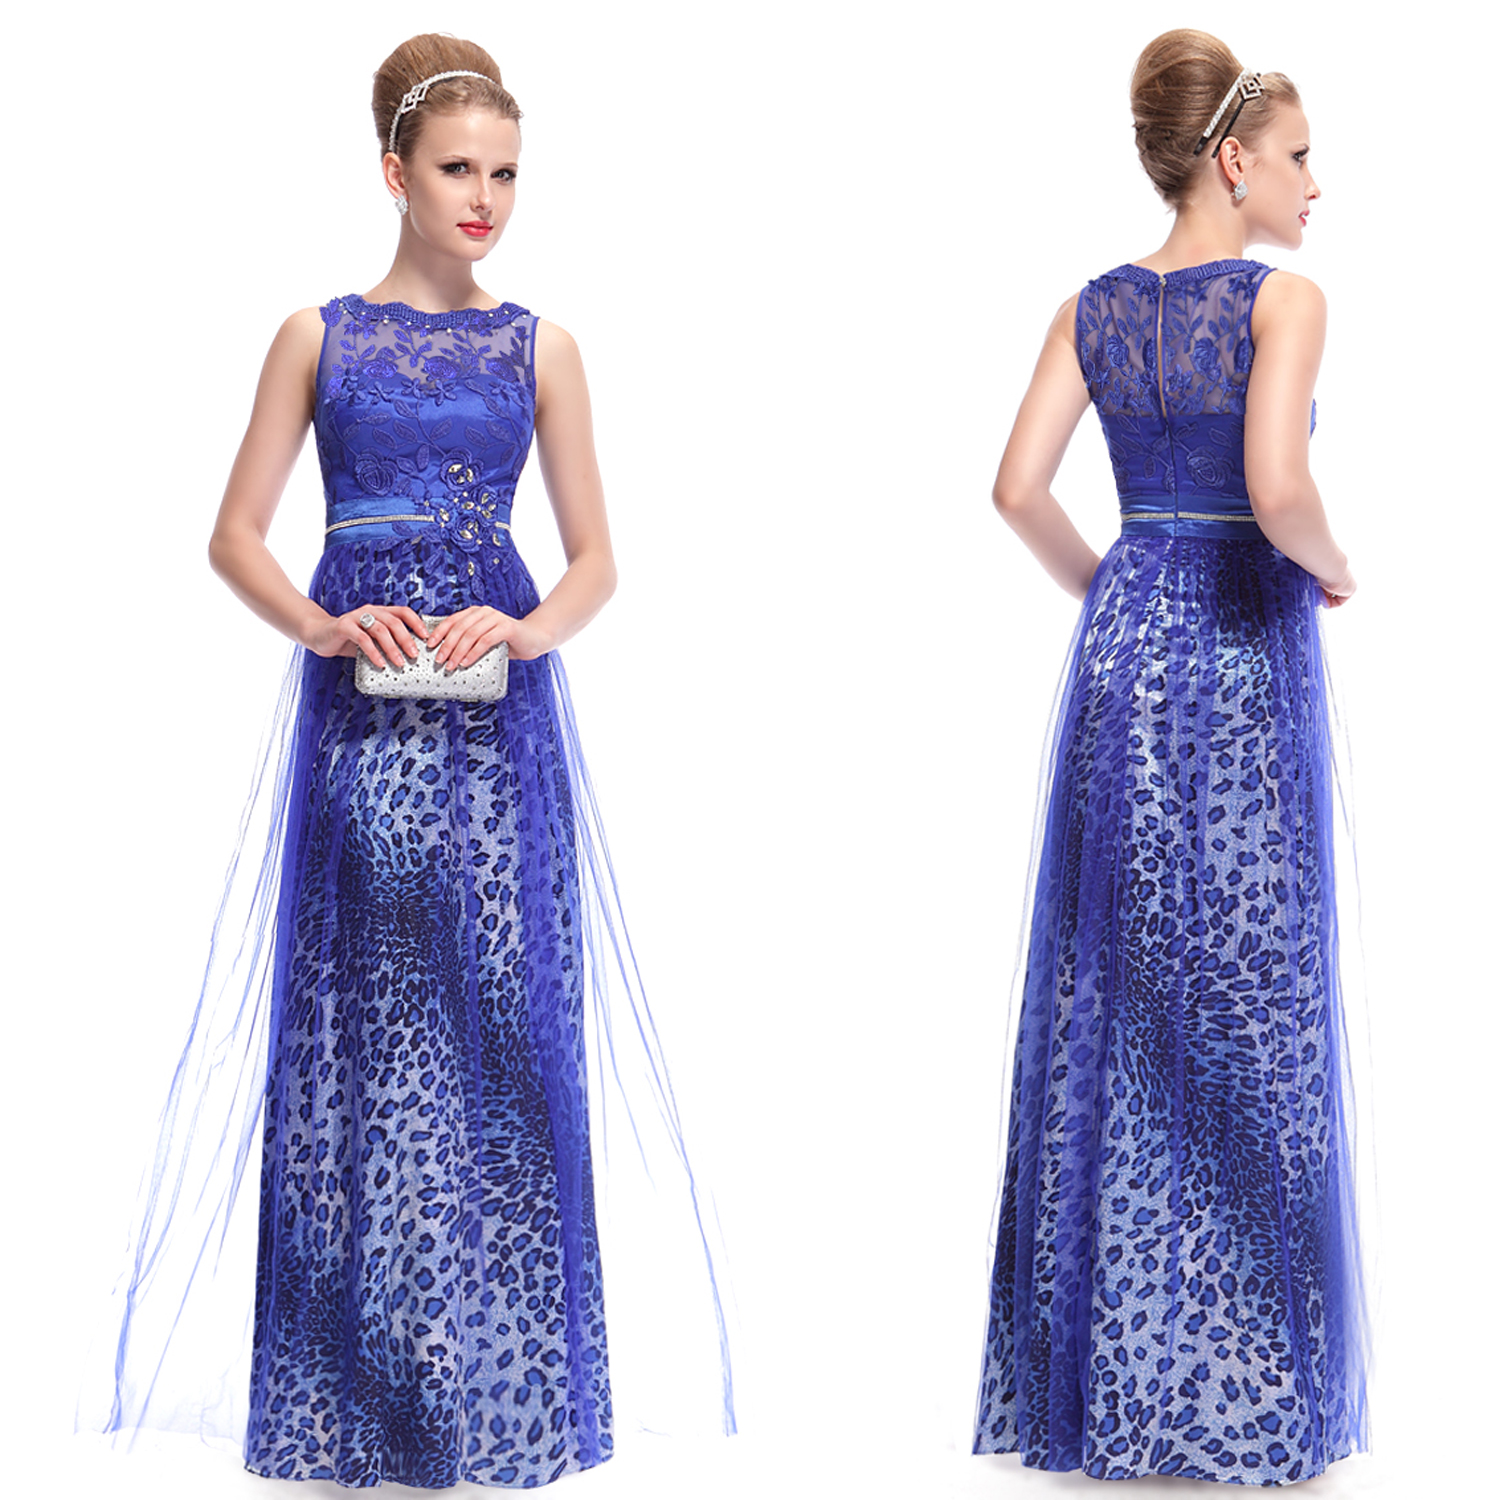 ... -Blue-Dresses-Evening-Formal-Party-Prom-Dress-Gown-09978-UK-Size-18